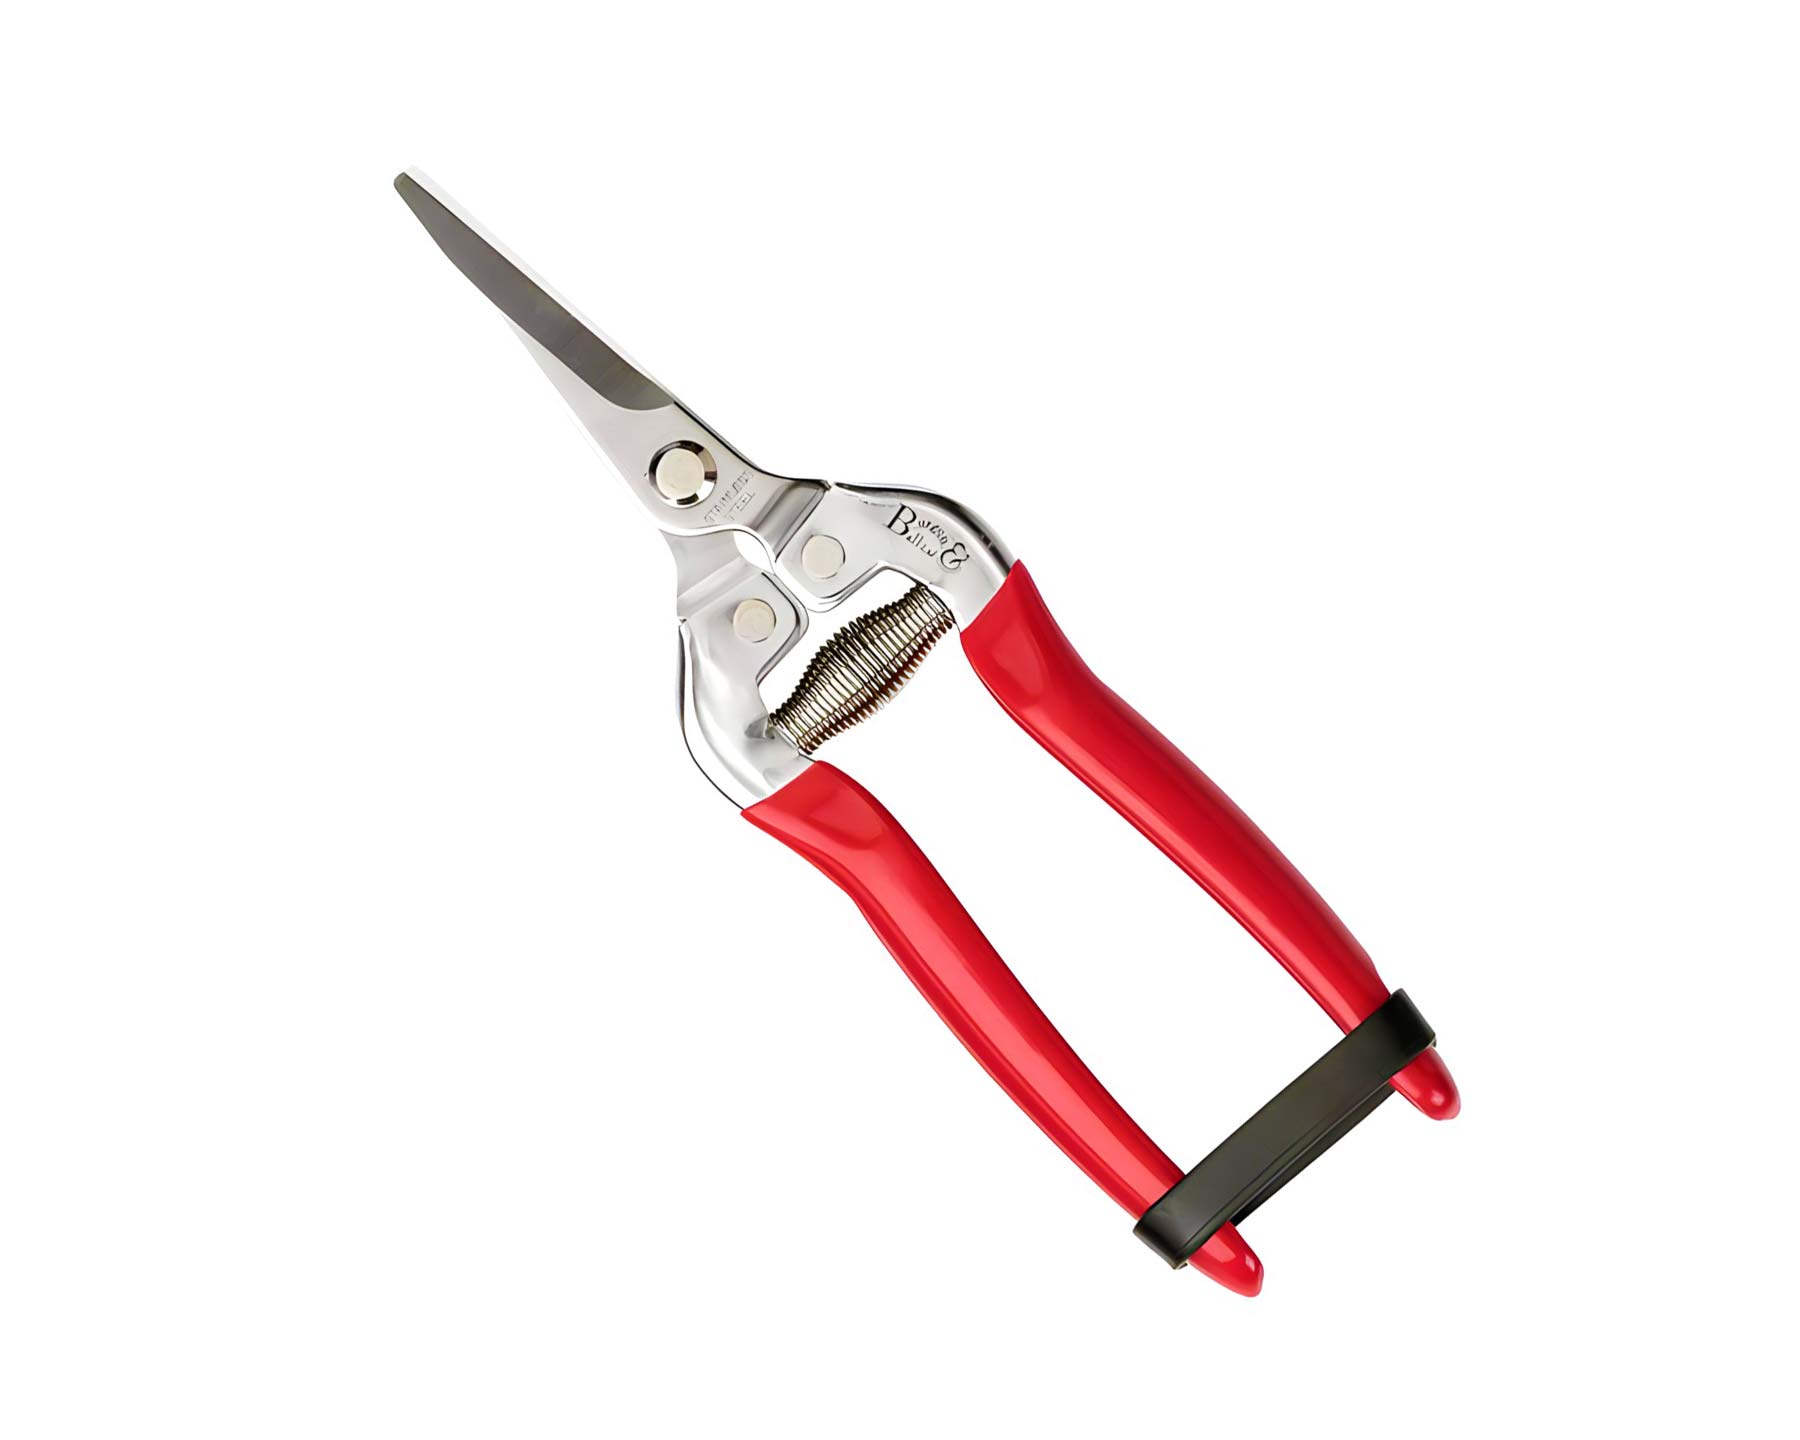 RHS Snip and Holster British Bloom Design- The fine blades and scissor cutting action are an excellent design for cutting flowers